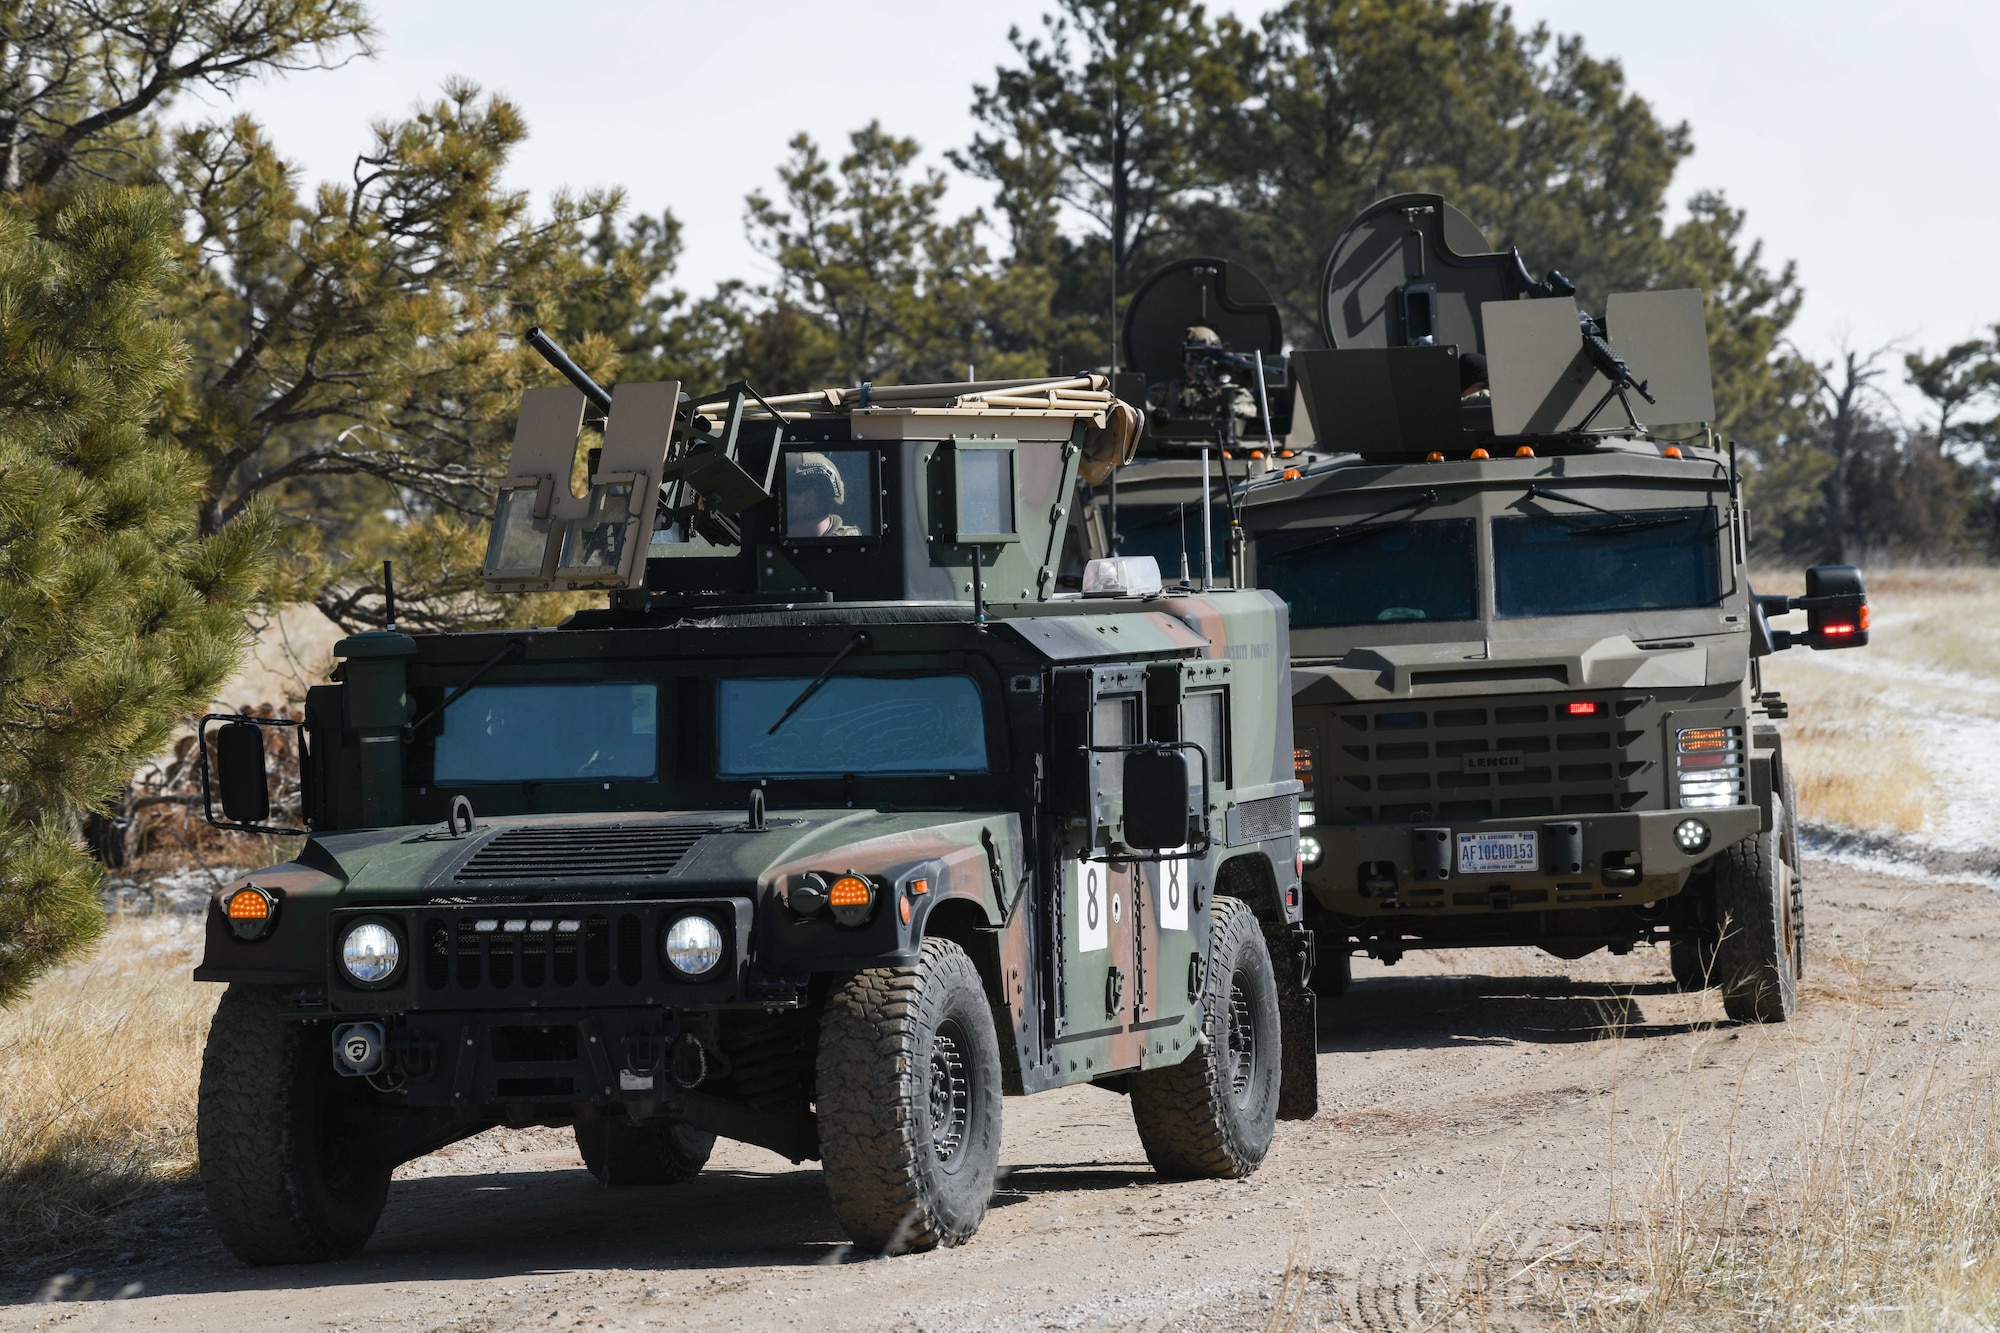 A convoy approaches a treeline moments before a simulated payload transporter attack in Pine Bluffs, Wyoming, March 30, 2022. The 90th Security Forces Group conducted full mission profile training to further develop response capabilities to contingency situations during a PT movement. (U.S. Air Force photo by Airman 1st Class Charles Munoz)